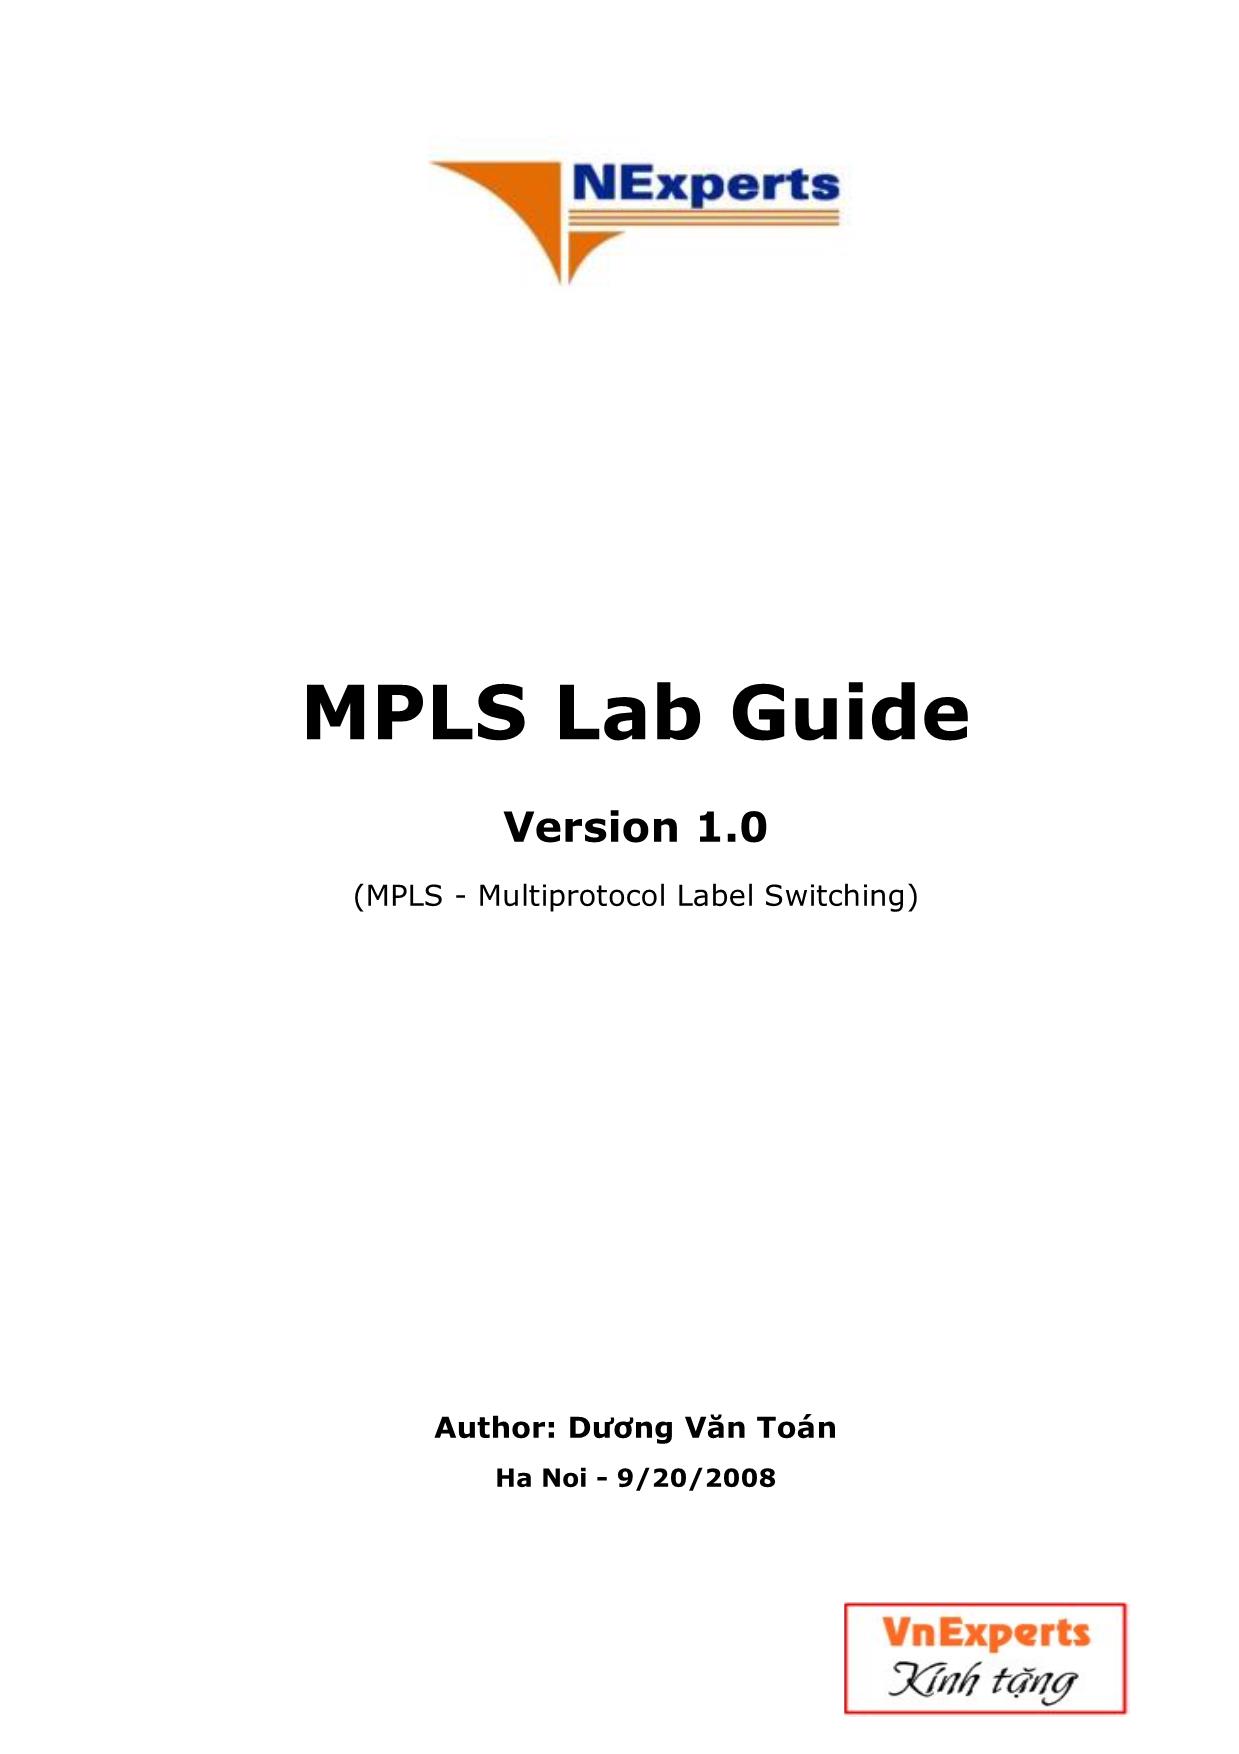 MPLS Lab Guide trang 1